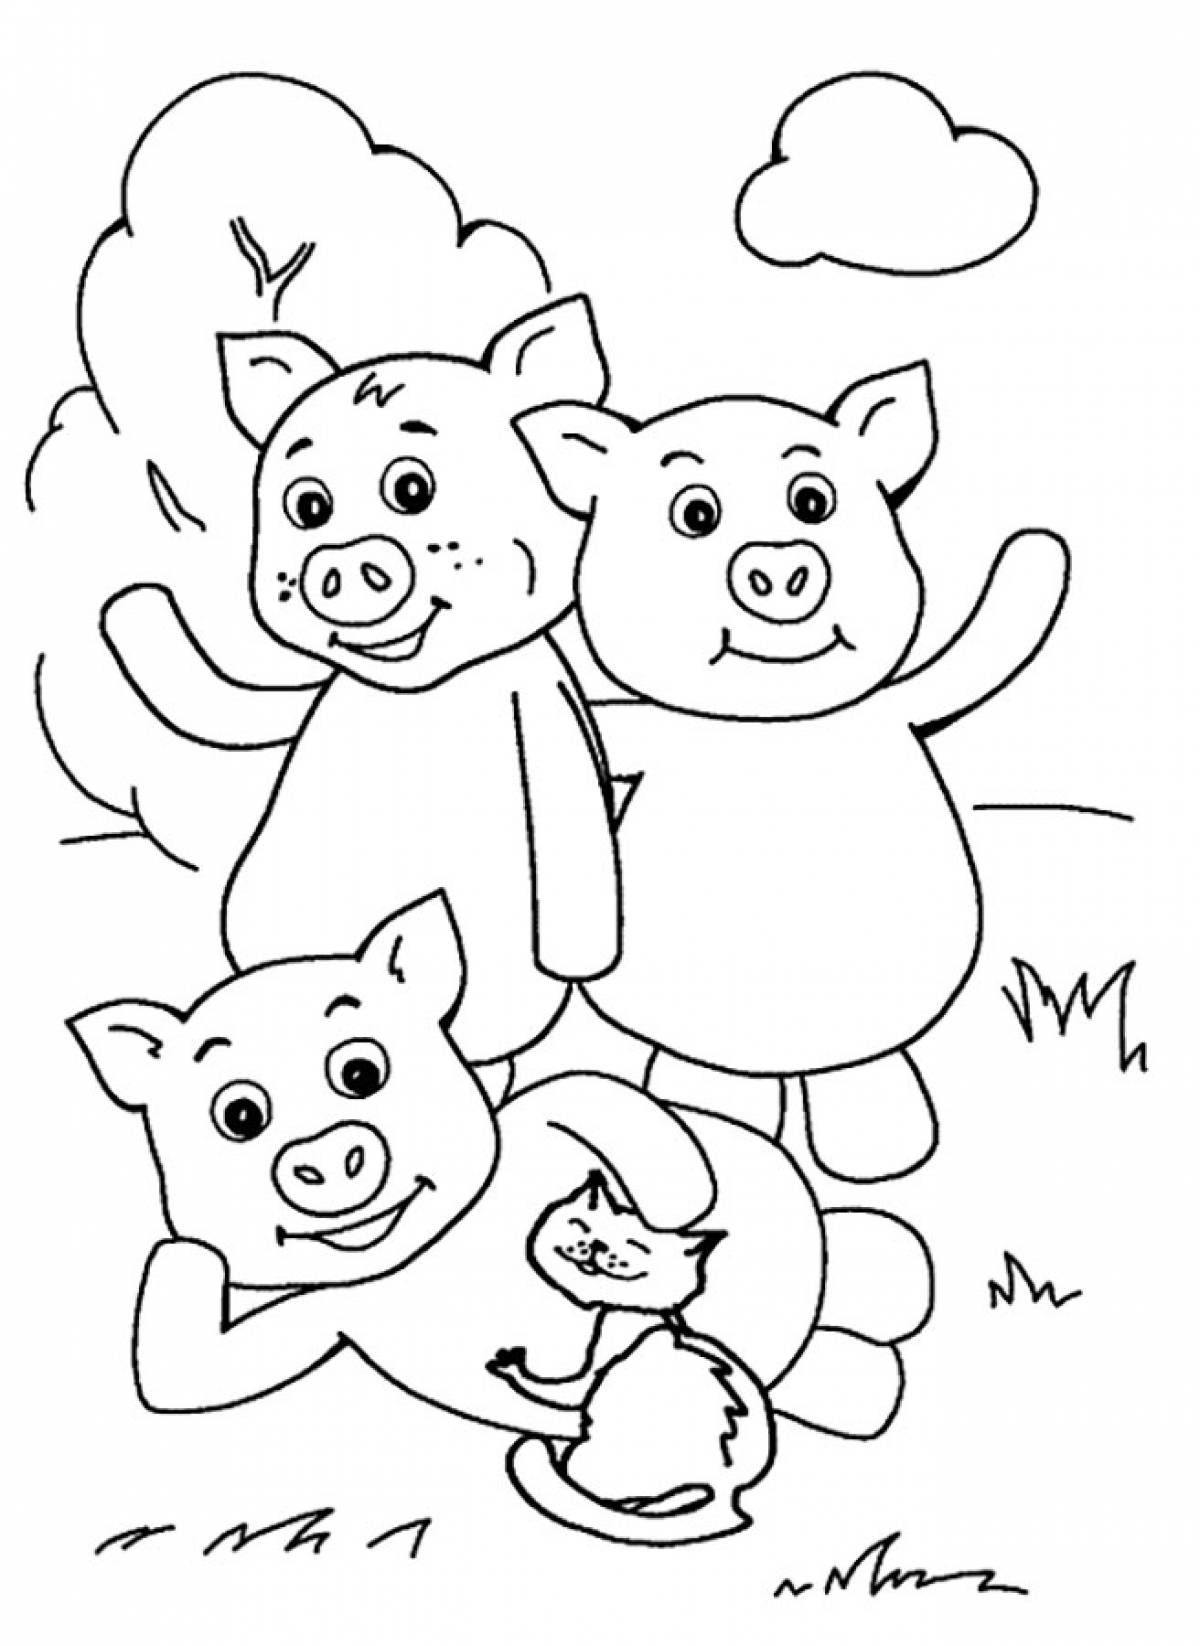 Three little pigs and a cat